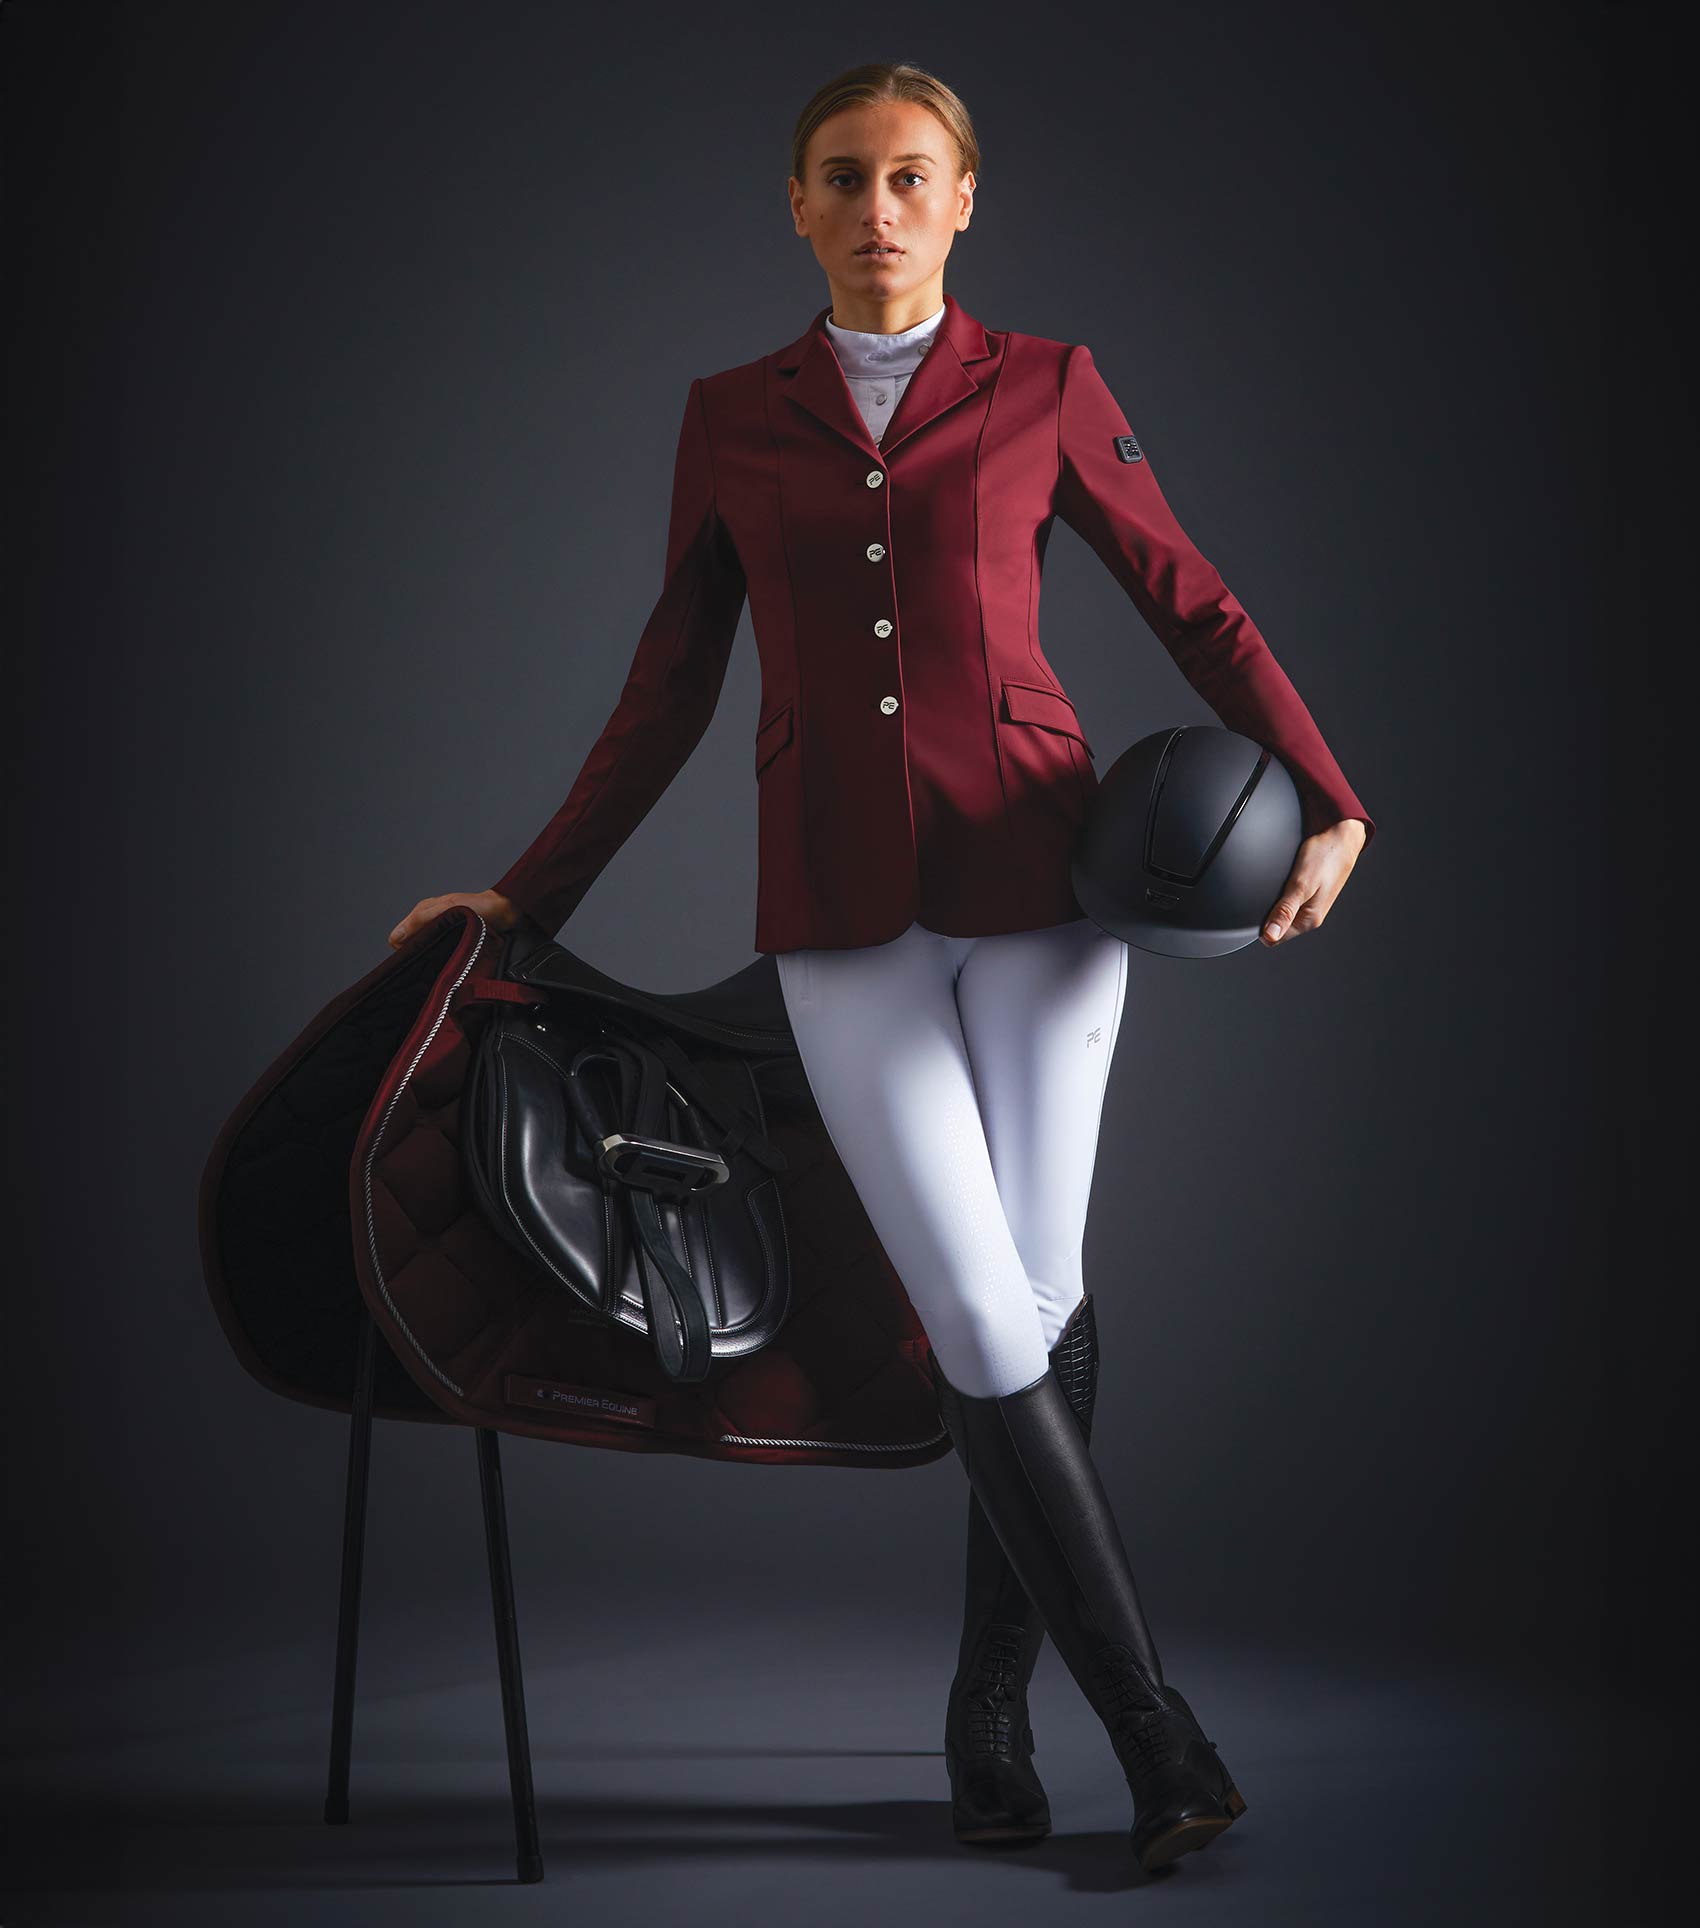 Competition clothing and equestrian wear. Wine/rogue red